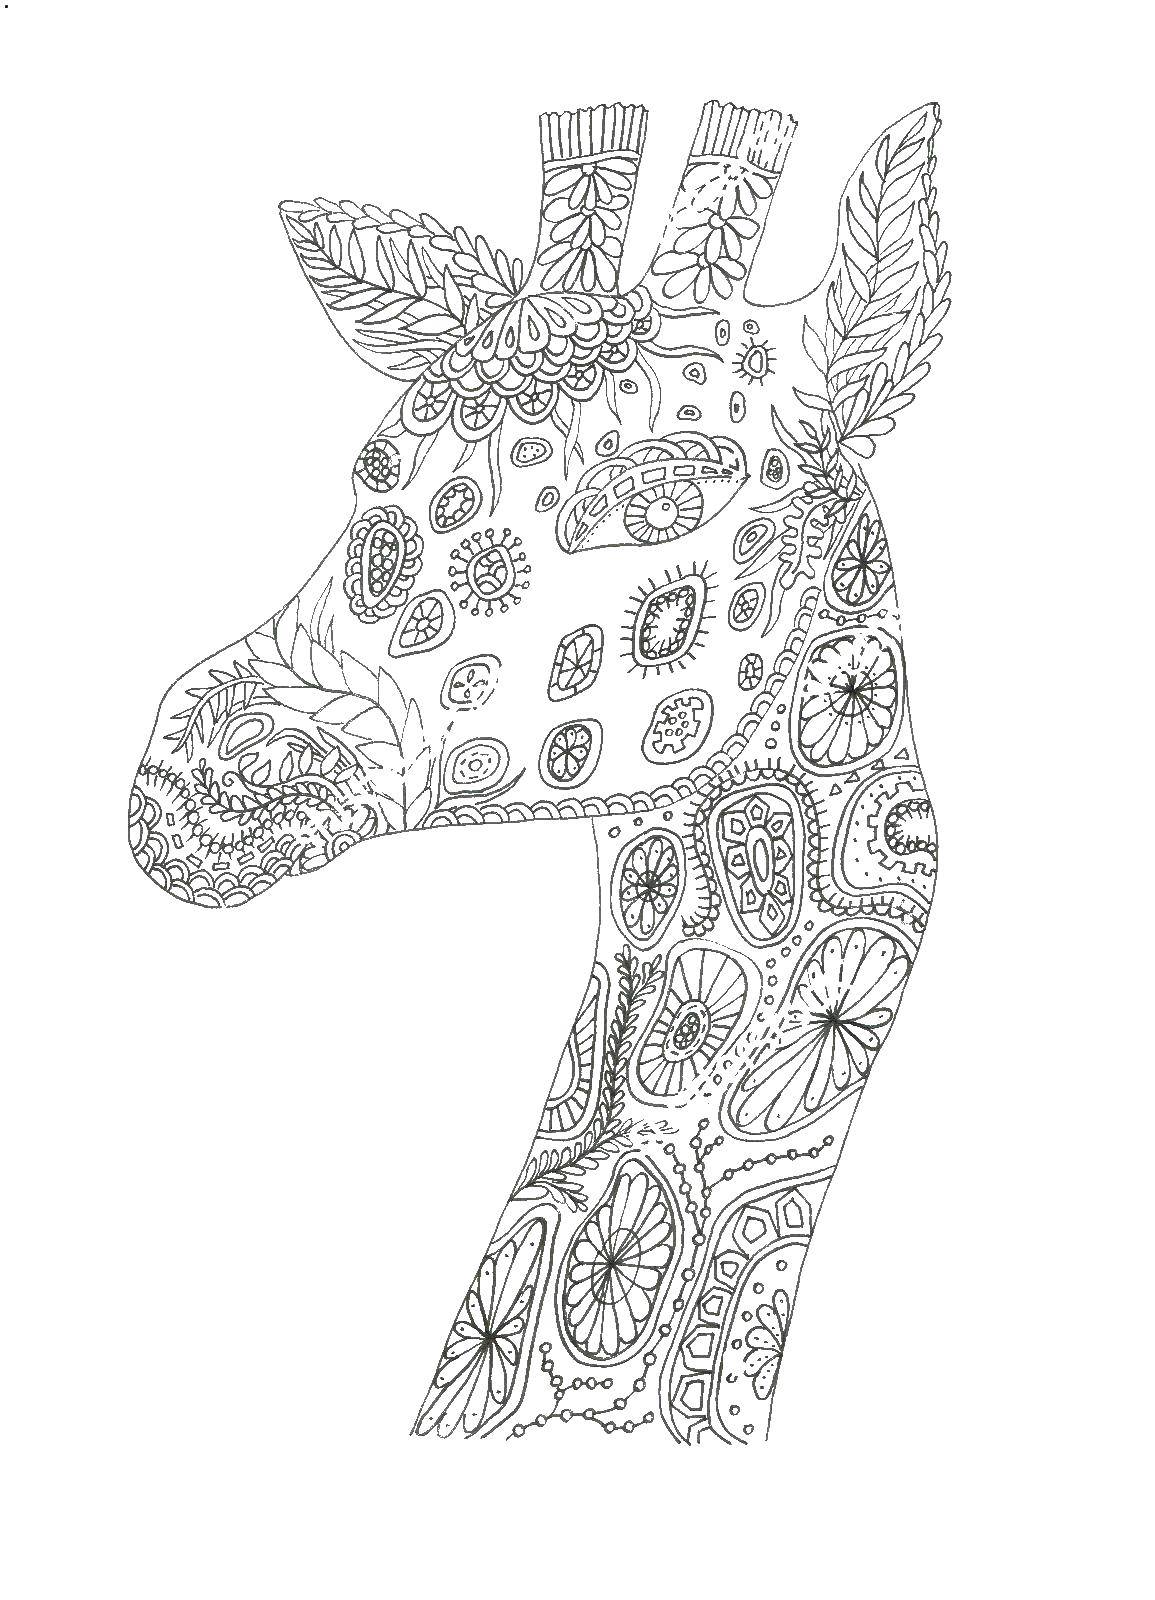 Coloring Giraffe, coloring antistress. Category Bathroom with shower. Tags:  antisress, patterns, shapes, giraffe.